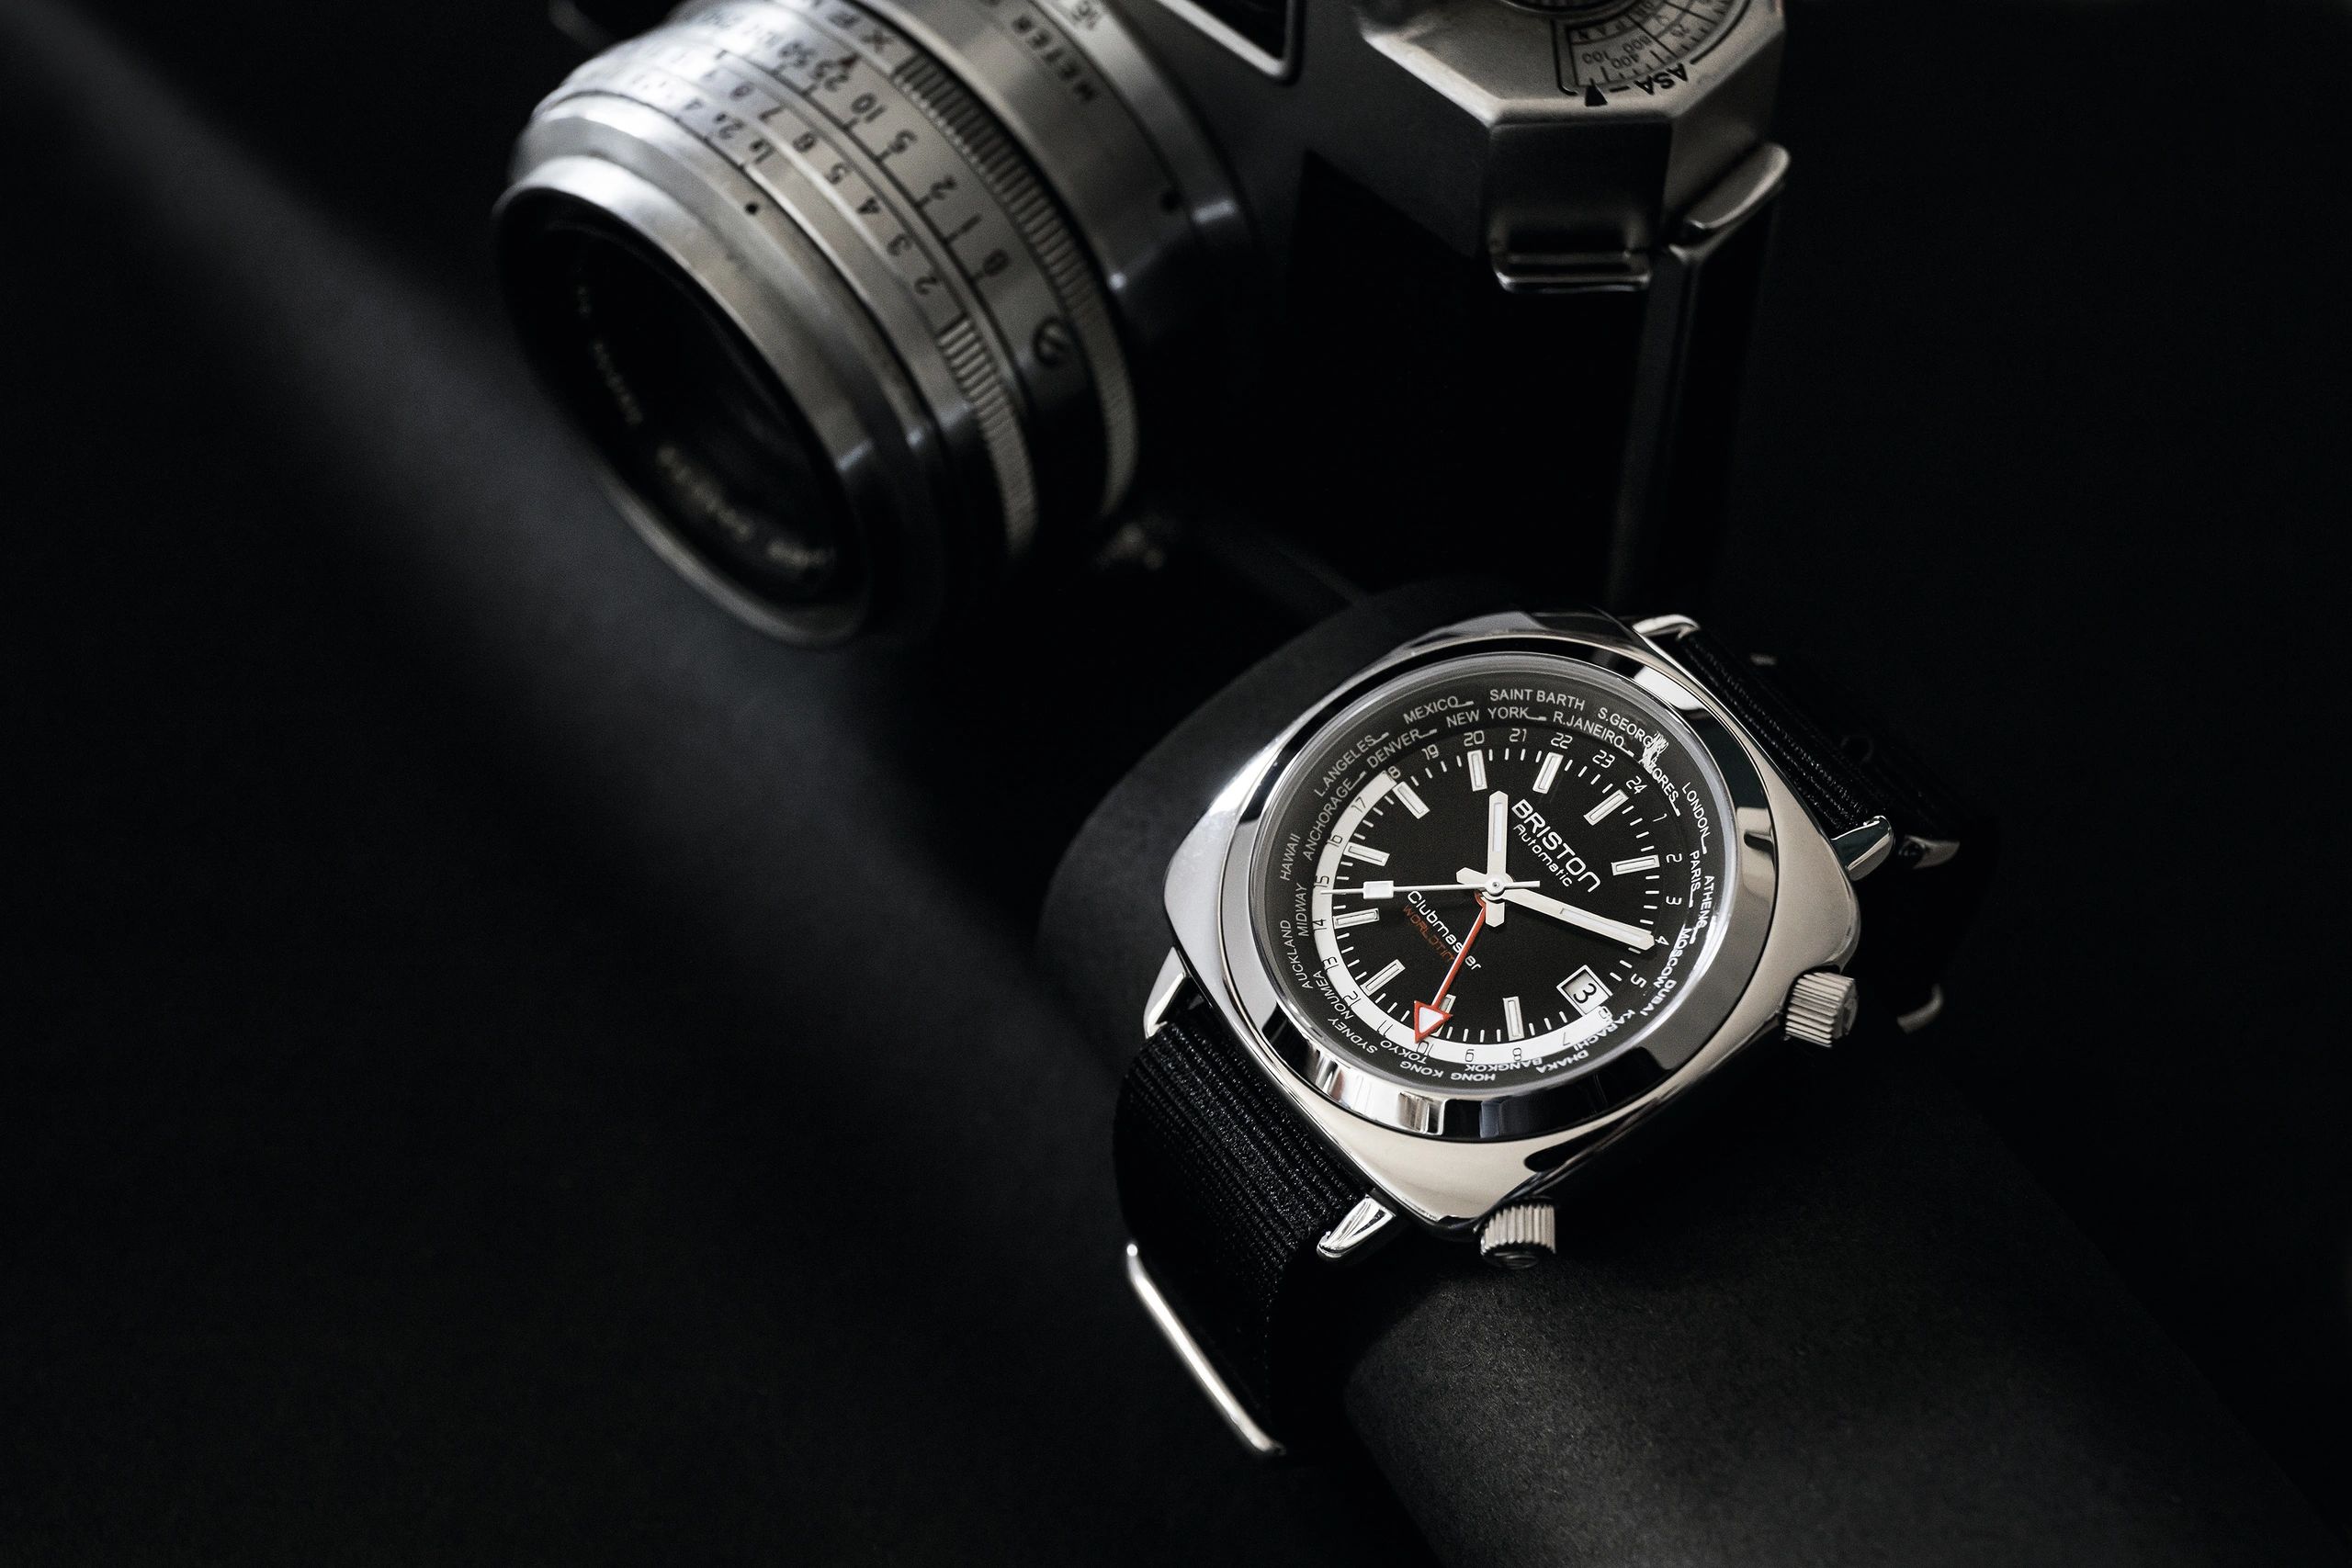 Briston Clubmaster Traveler Worldtime GMT available at Time and More UK Ltd